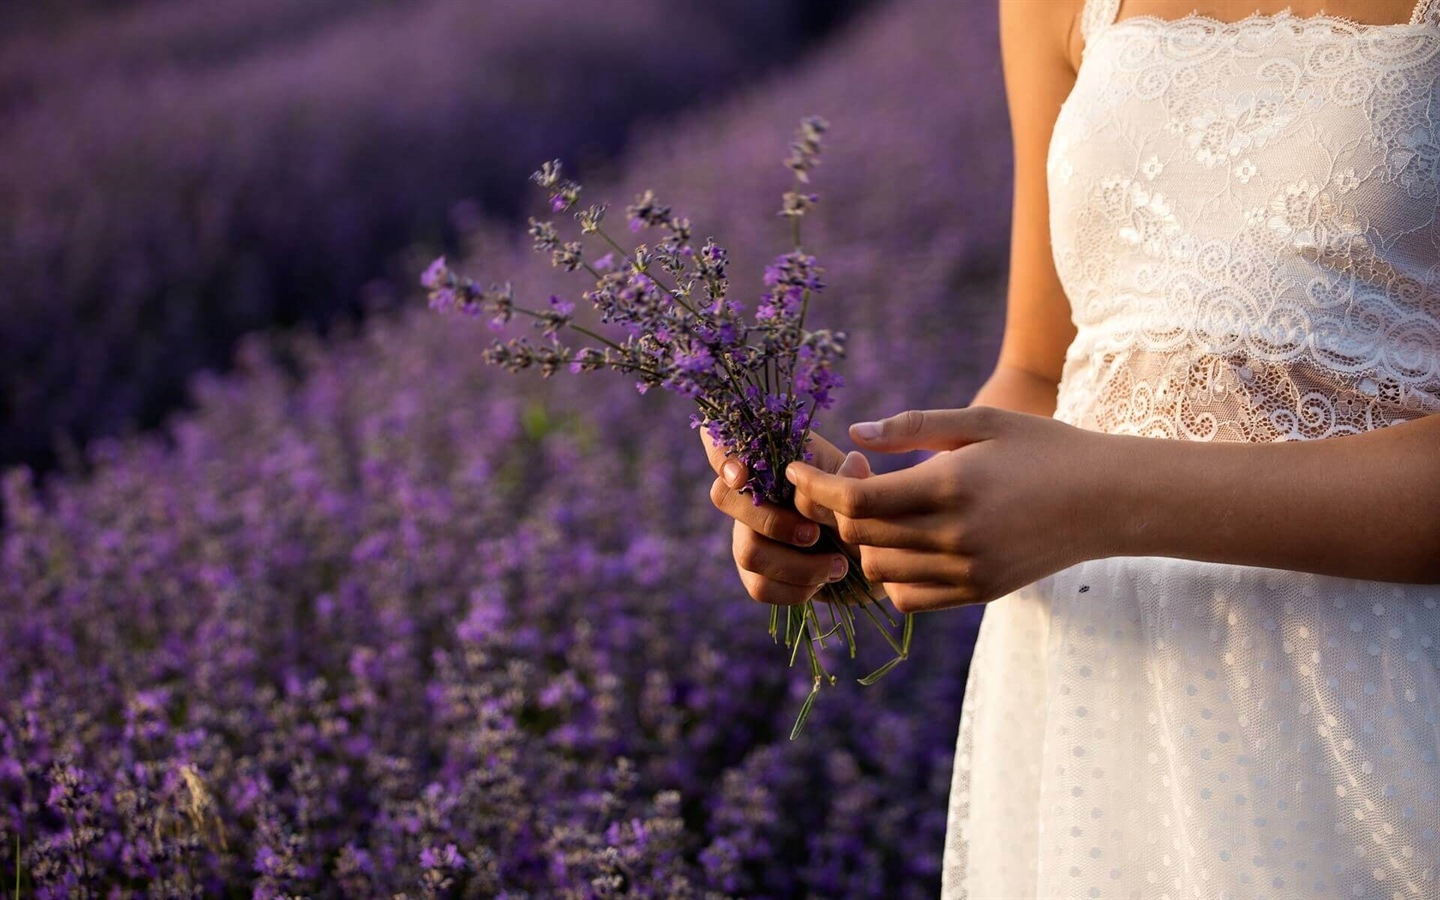 Aromatherapy - how to make lavender essential oil